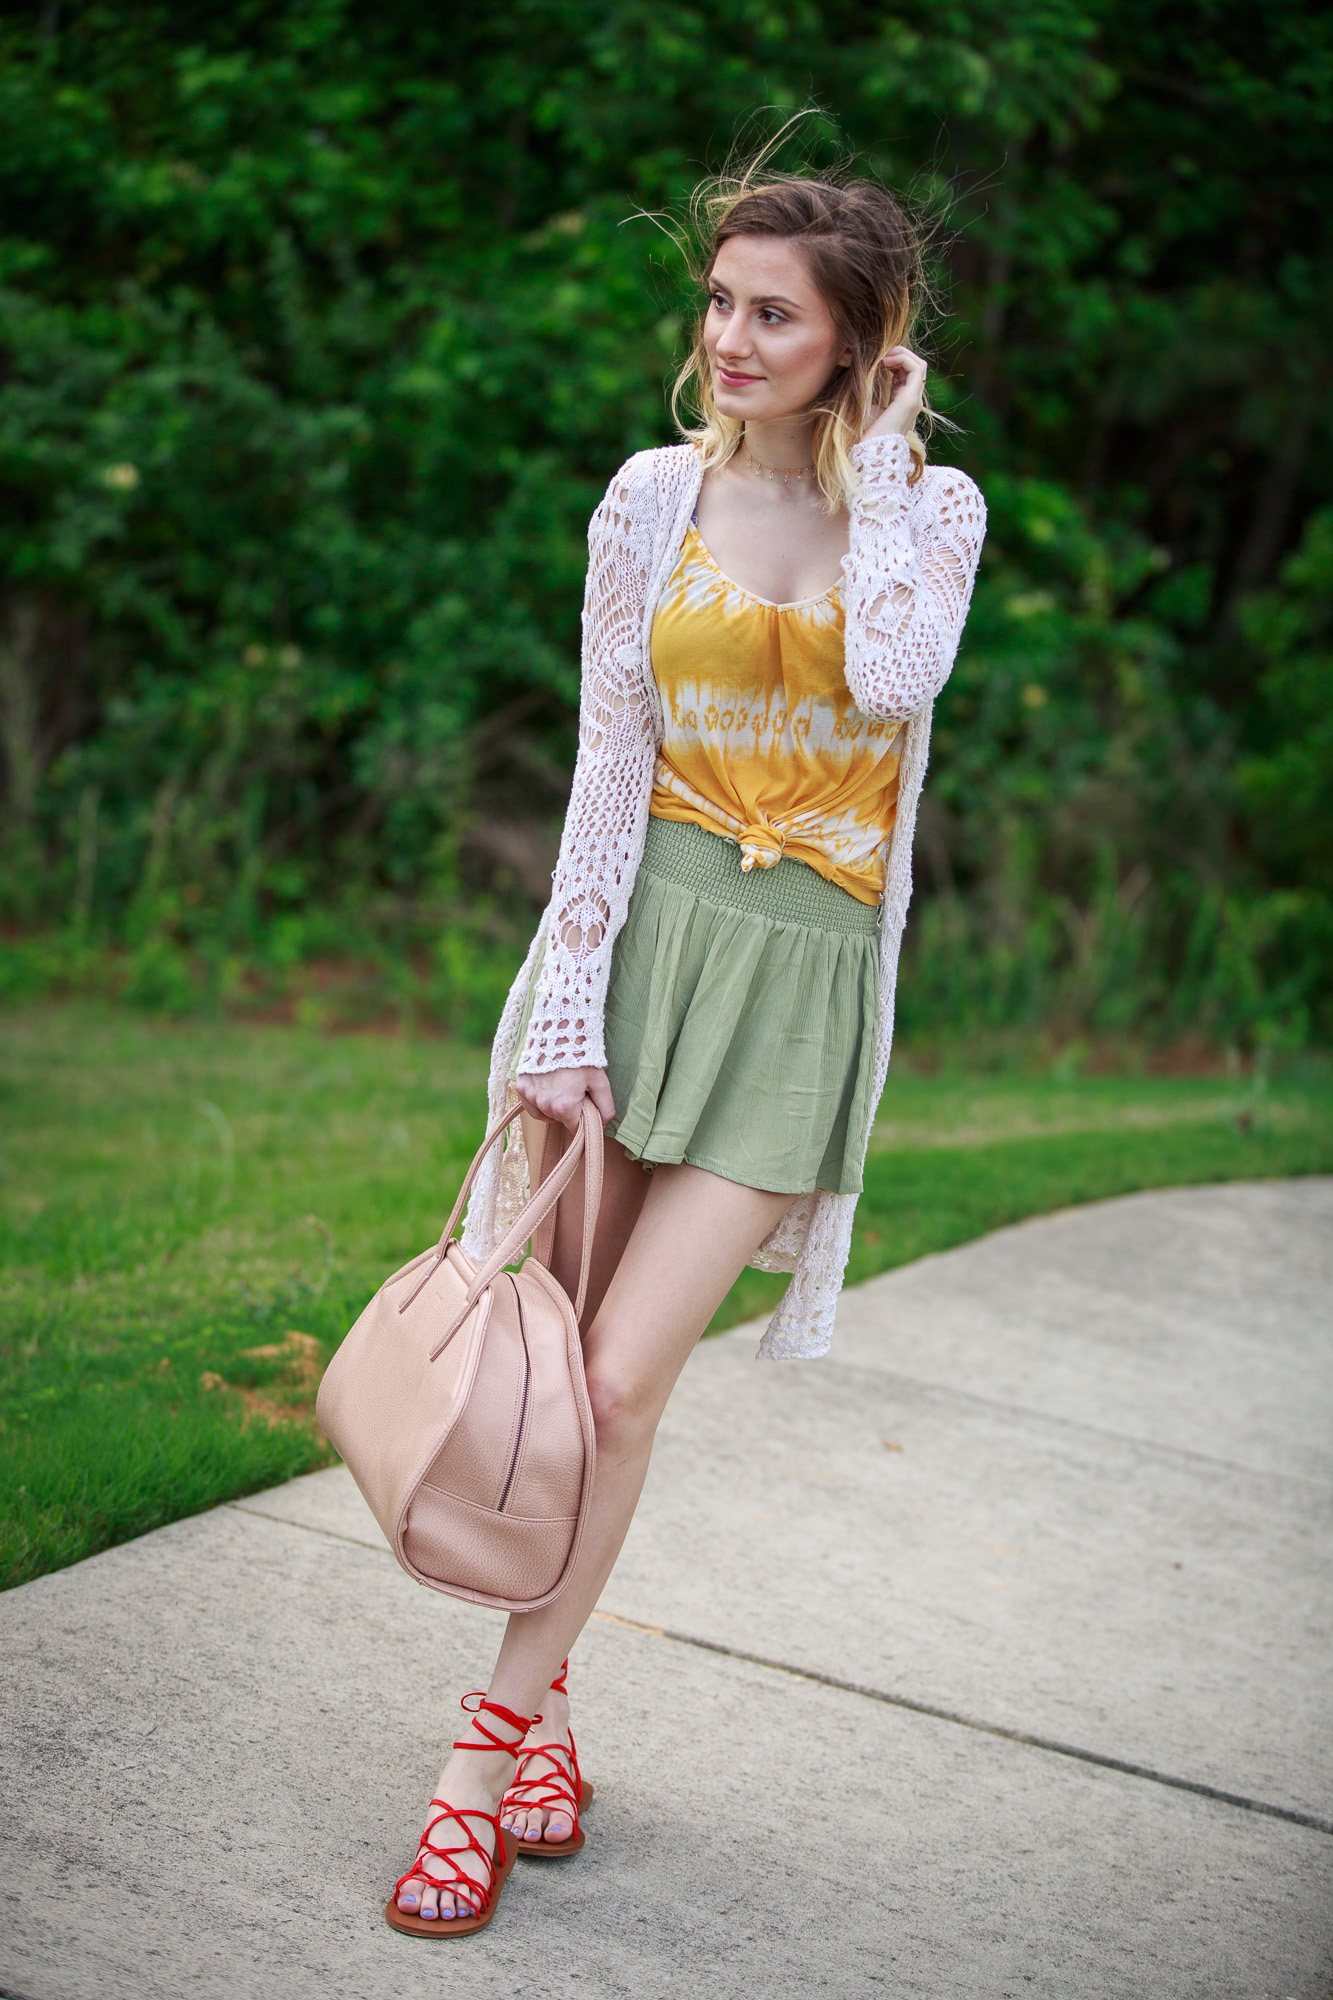 Fashion blogger Jessica Linn from Linn Style wearing Forever21 shorts an H and M tank top tied at the waist, and white knit cardigan, Forever21 scrappy sandals, and carrying a faux leather Matt and Nat purse.